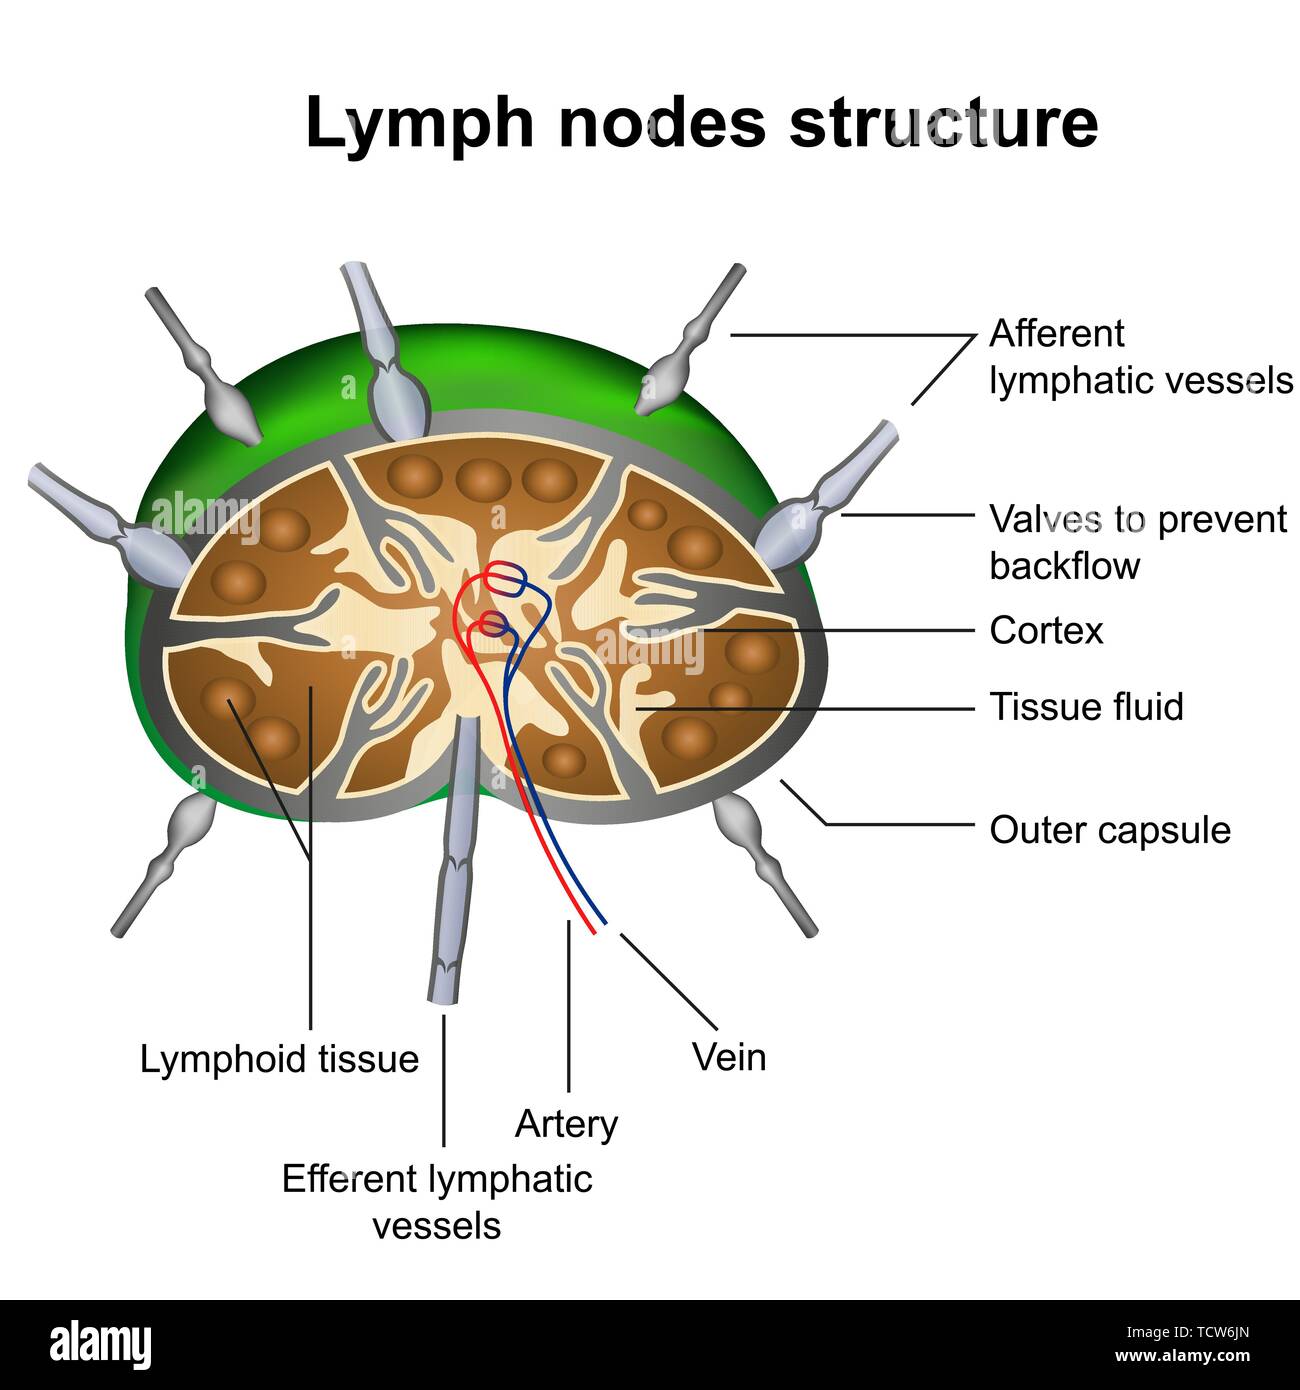 Lymph nodes structure medical vector illustration infographic on white background Stock Vector